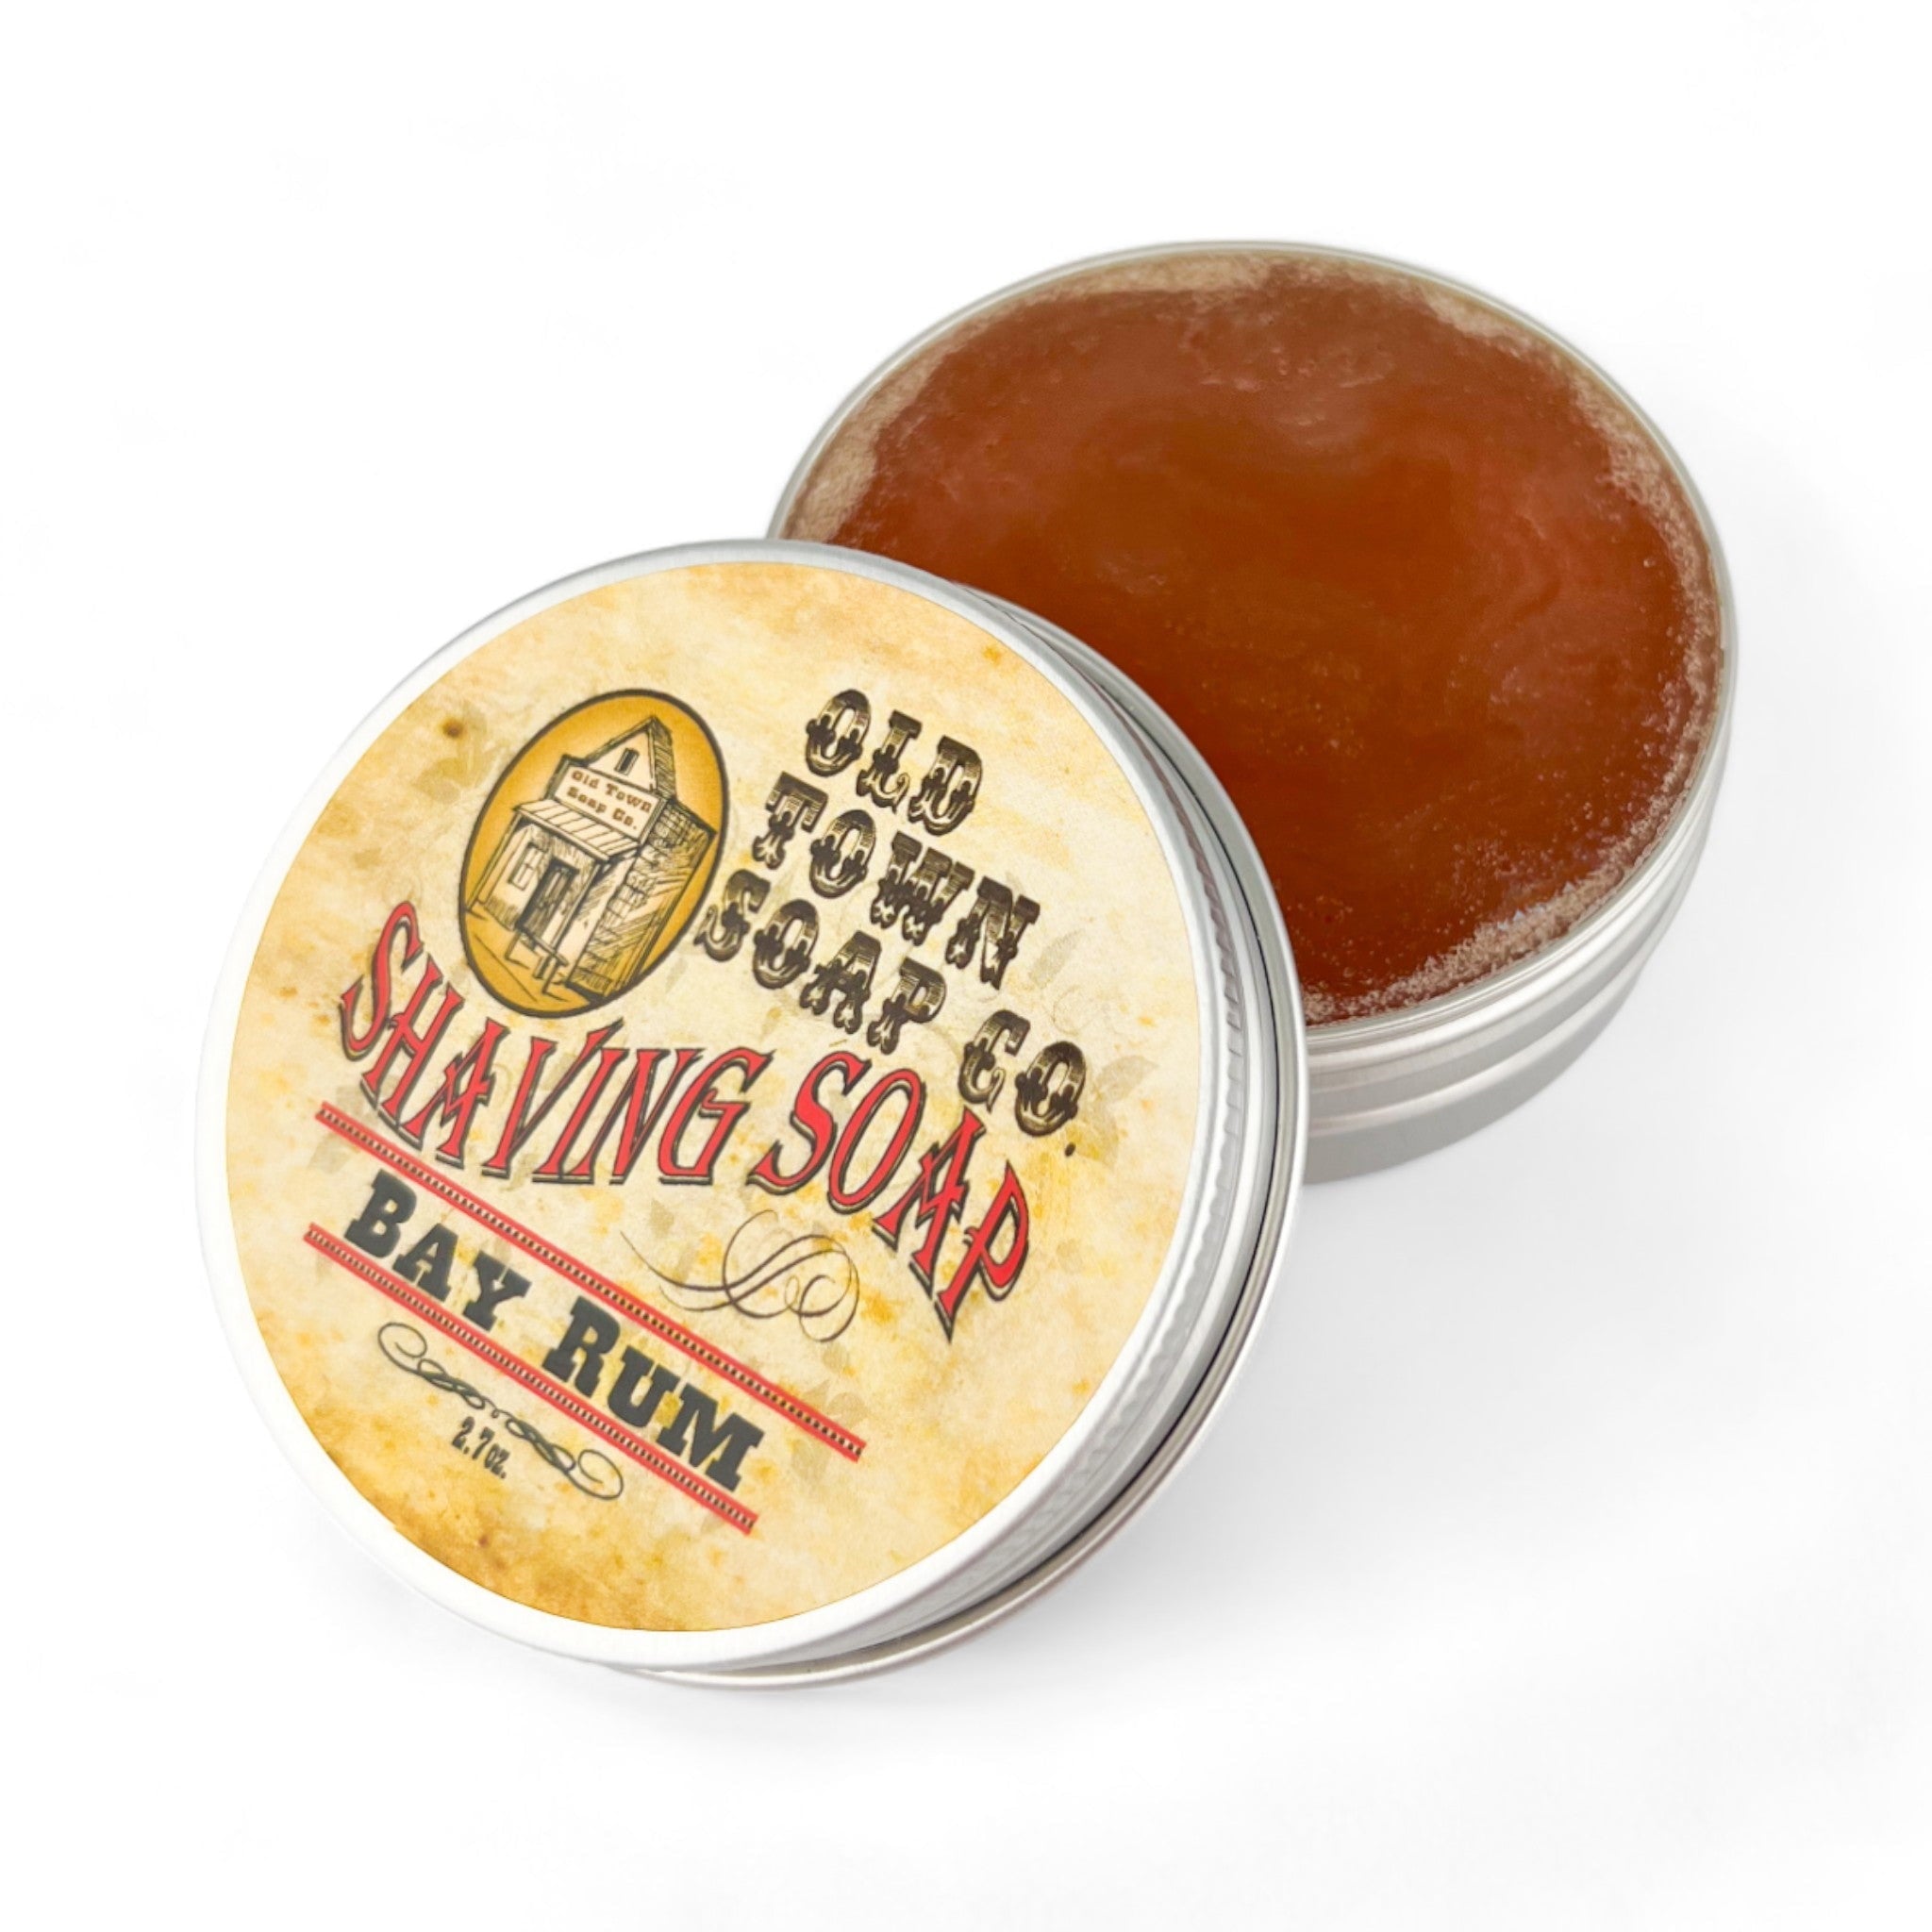 Bay Rum -Shave Soap Tin - Old Town Soap Co.